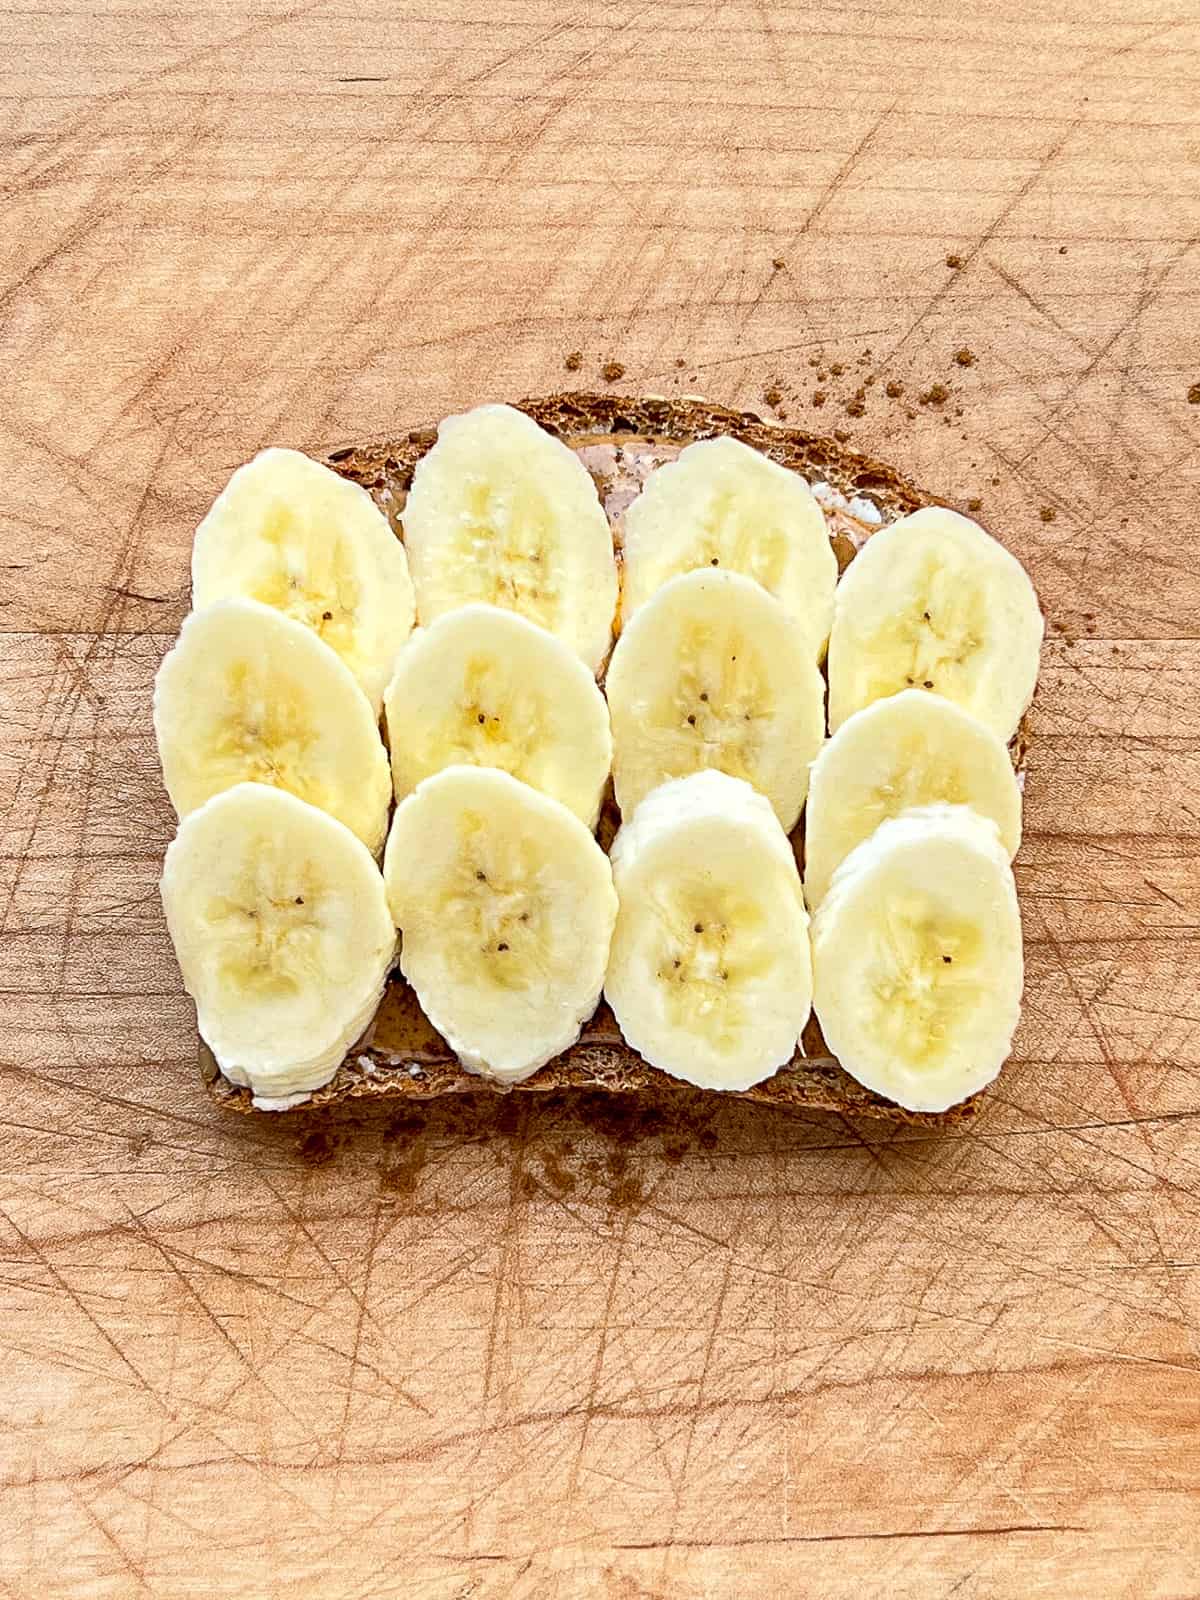 An image of banana slices laid out on toast.